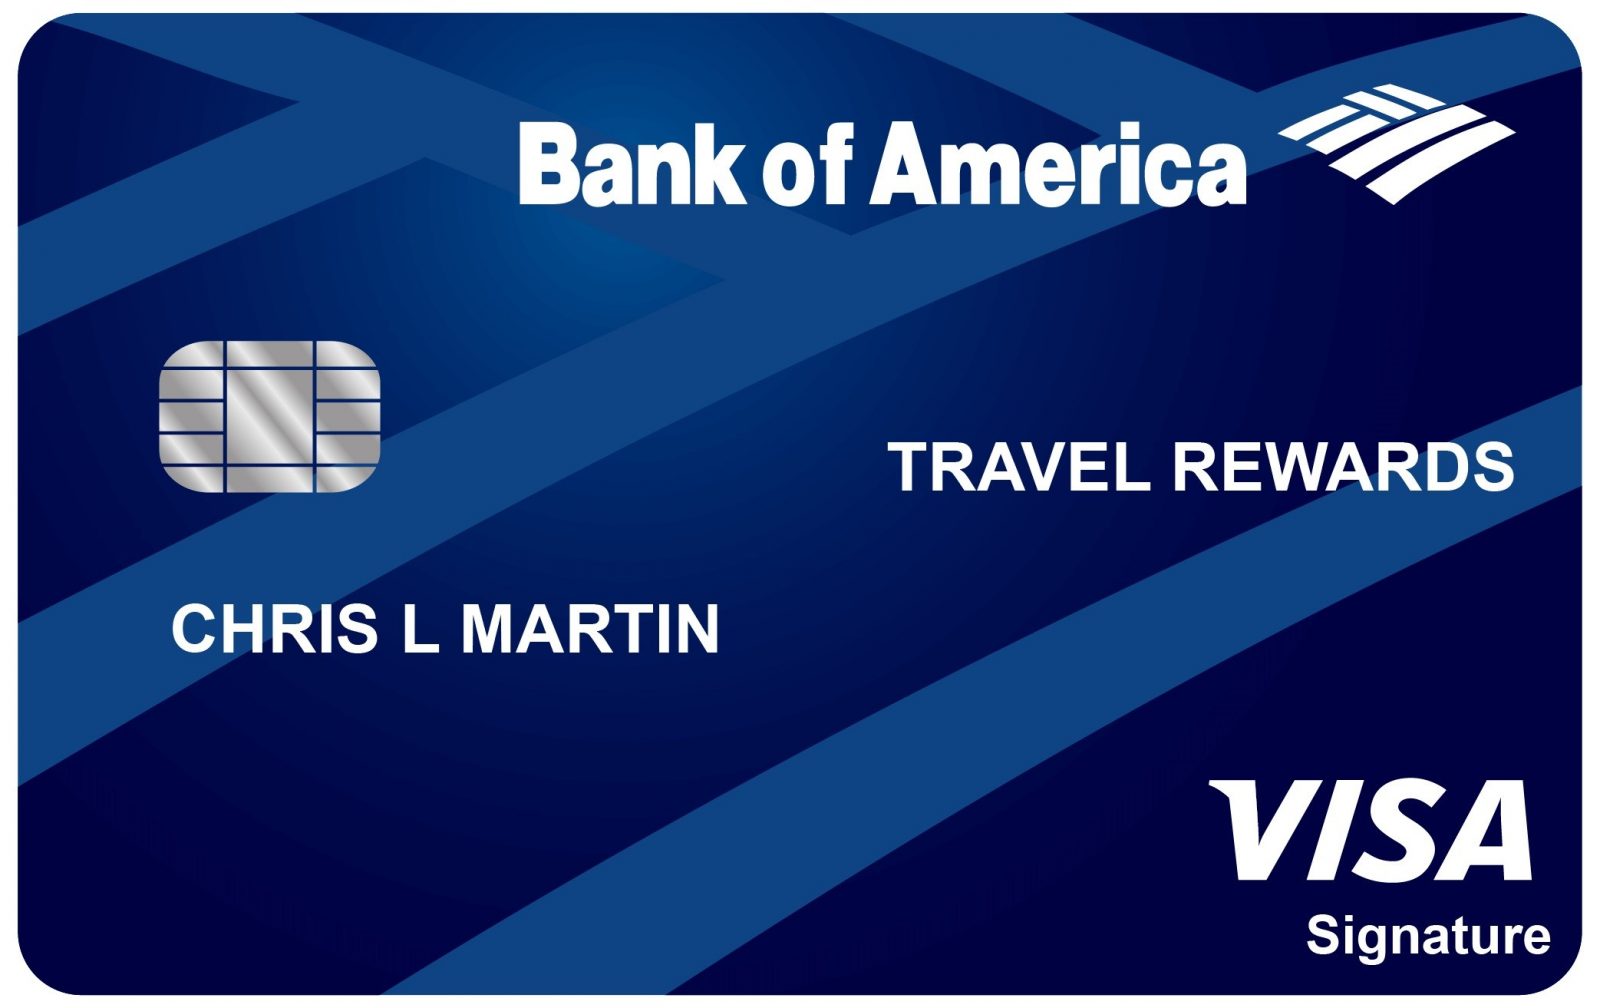 If you are looking for a credit card that has NO annual membership fees yet still provides amazing rewards every time you swipe? Bank of America Travel Rewards Credit Card is your best option. Here's how to apply...